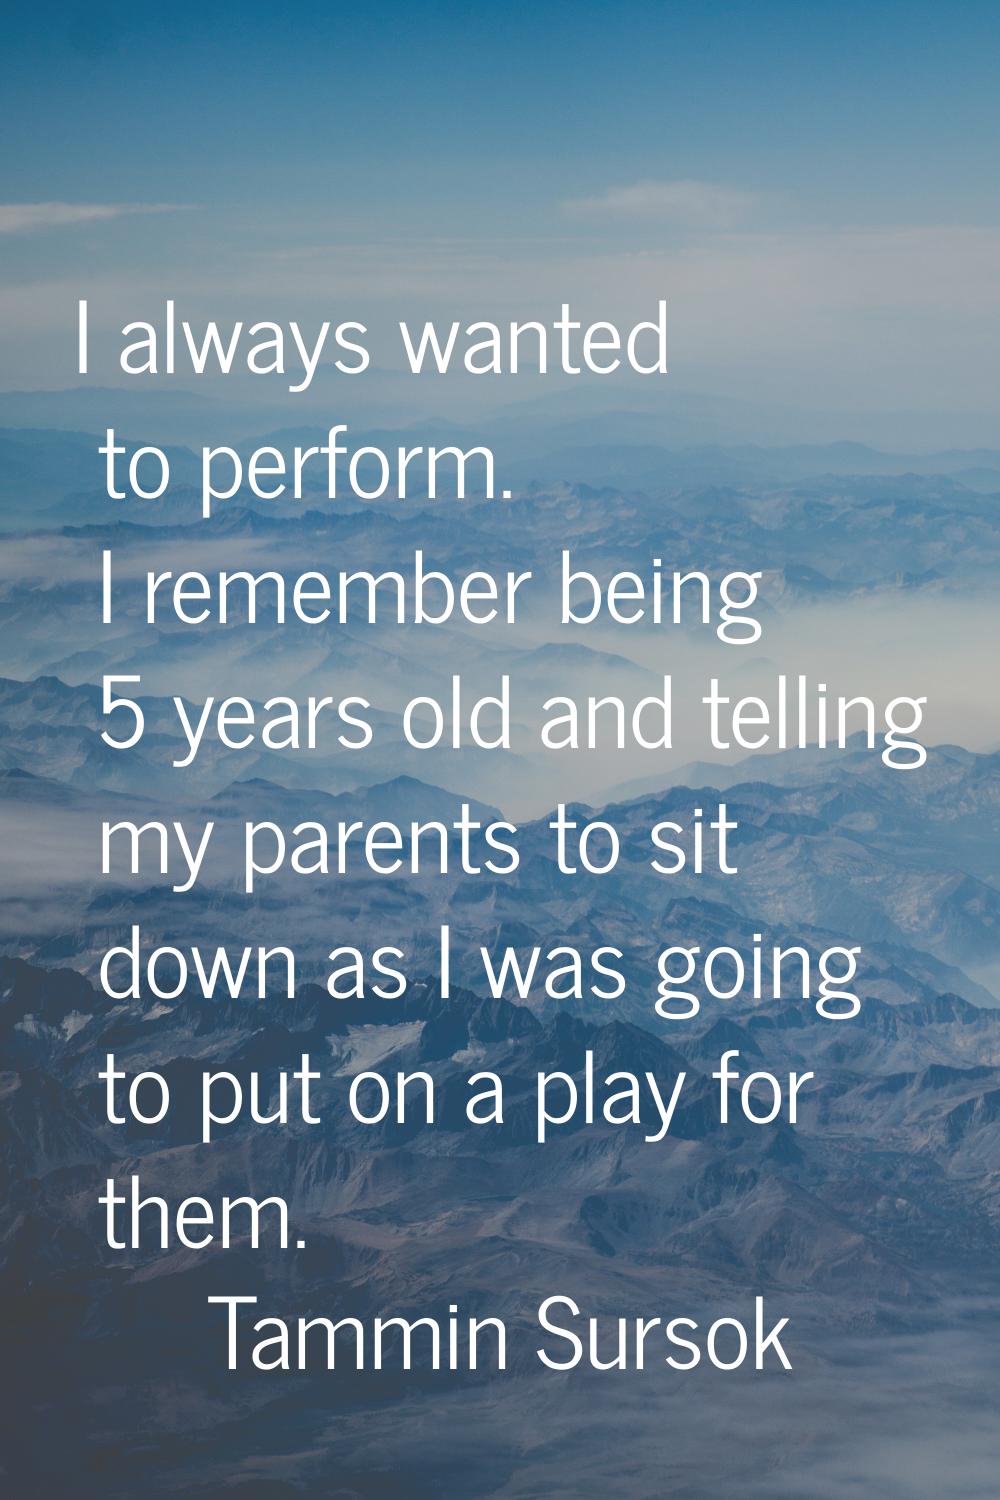 I always wanted to perform. I remember being 5 years old and telling my parents to sit down as I wa